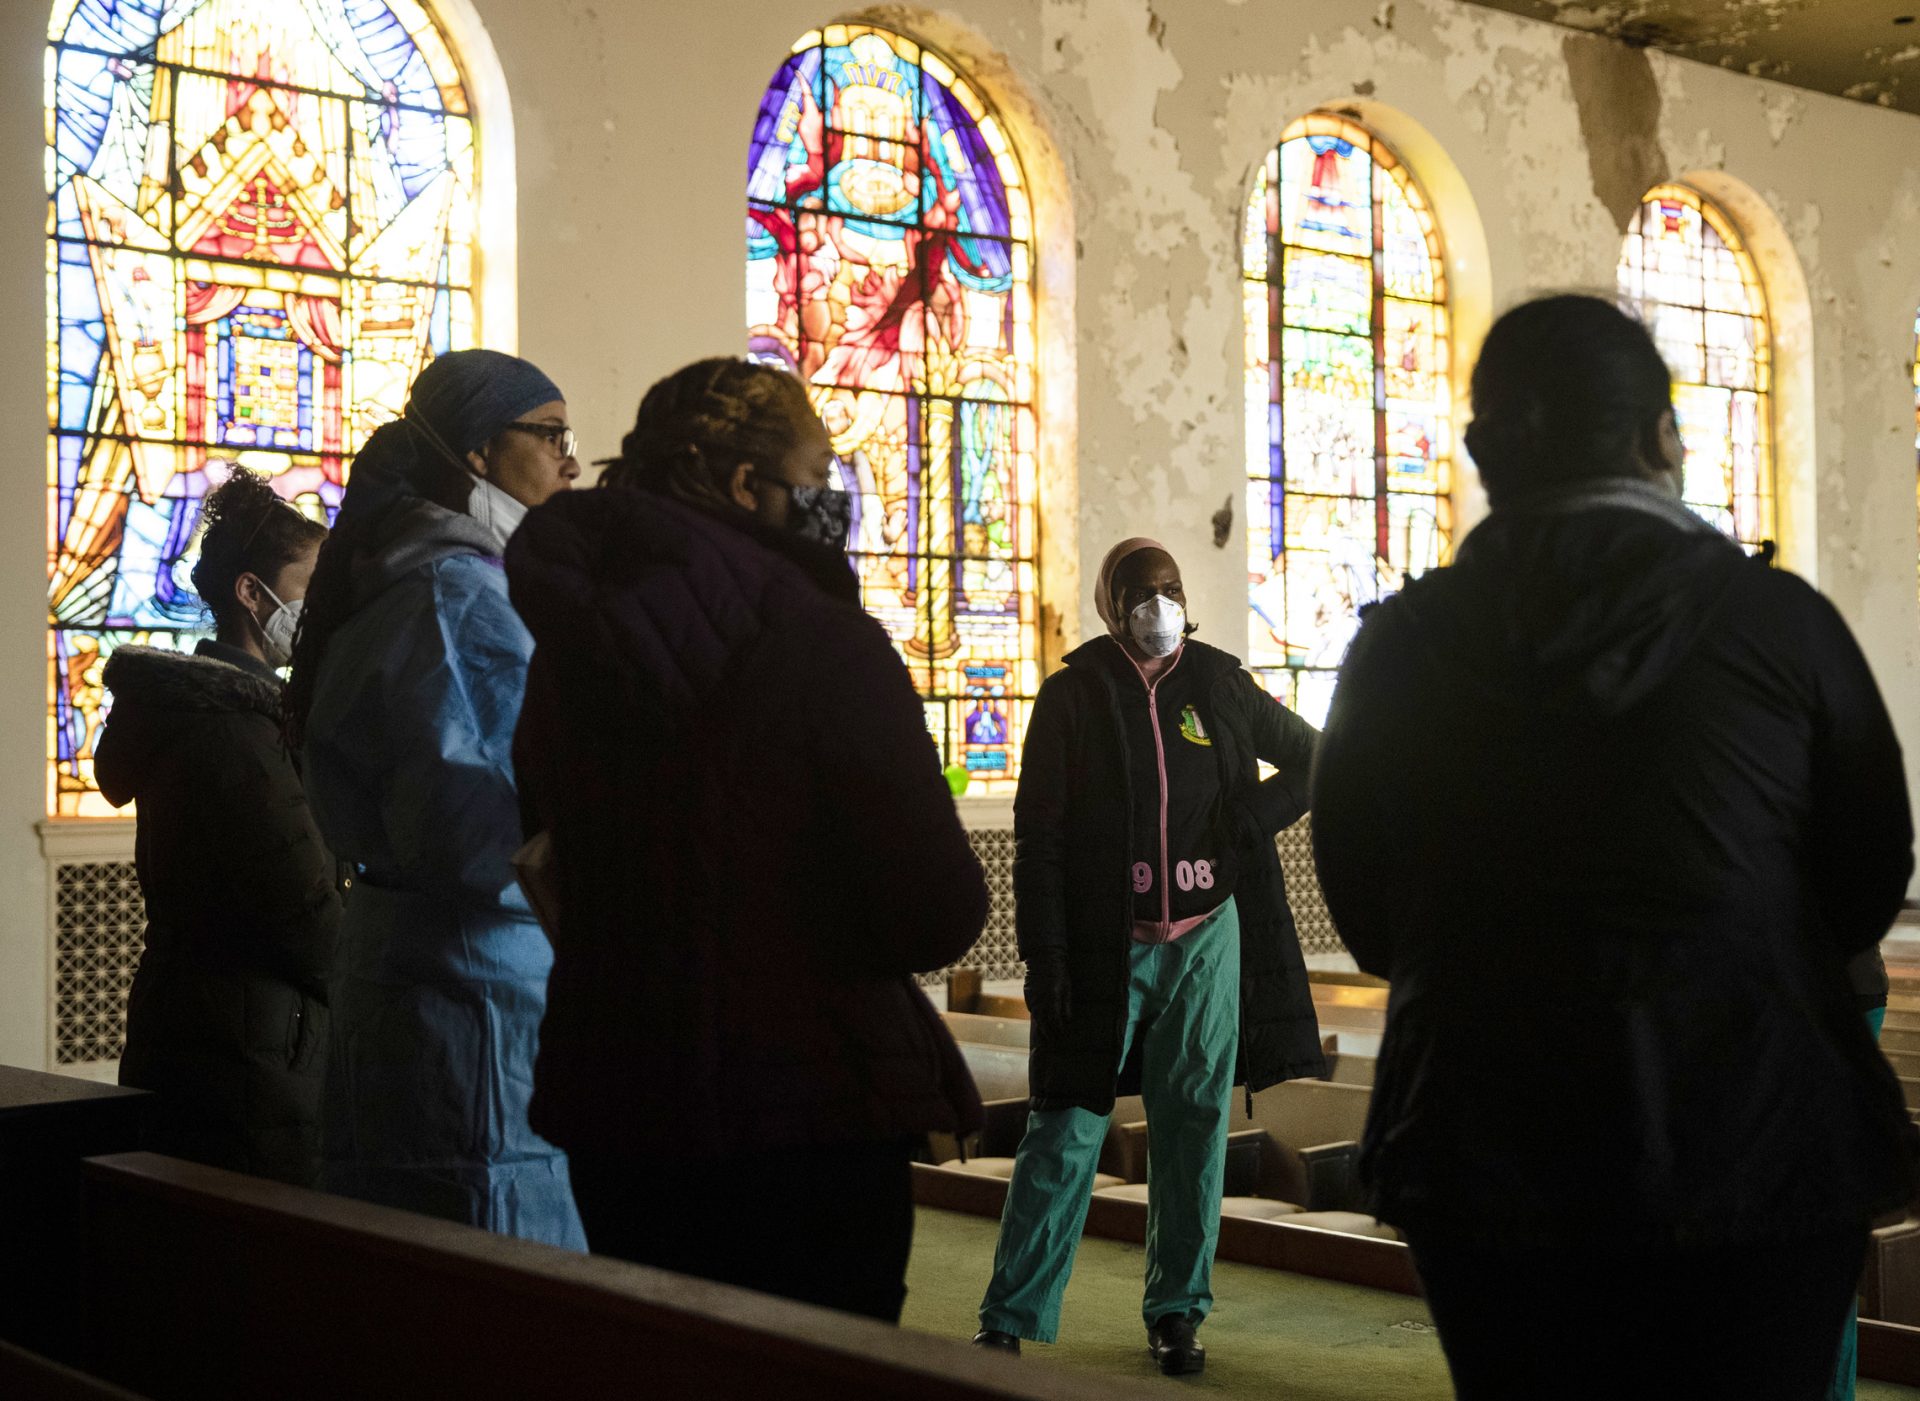 Dr. Ala Stanford speaks with volunteers ahead of the opening of a "barrier free" COVID-19 test location outside Pinn Memorial Baptist Church in Philadelphia in April.